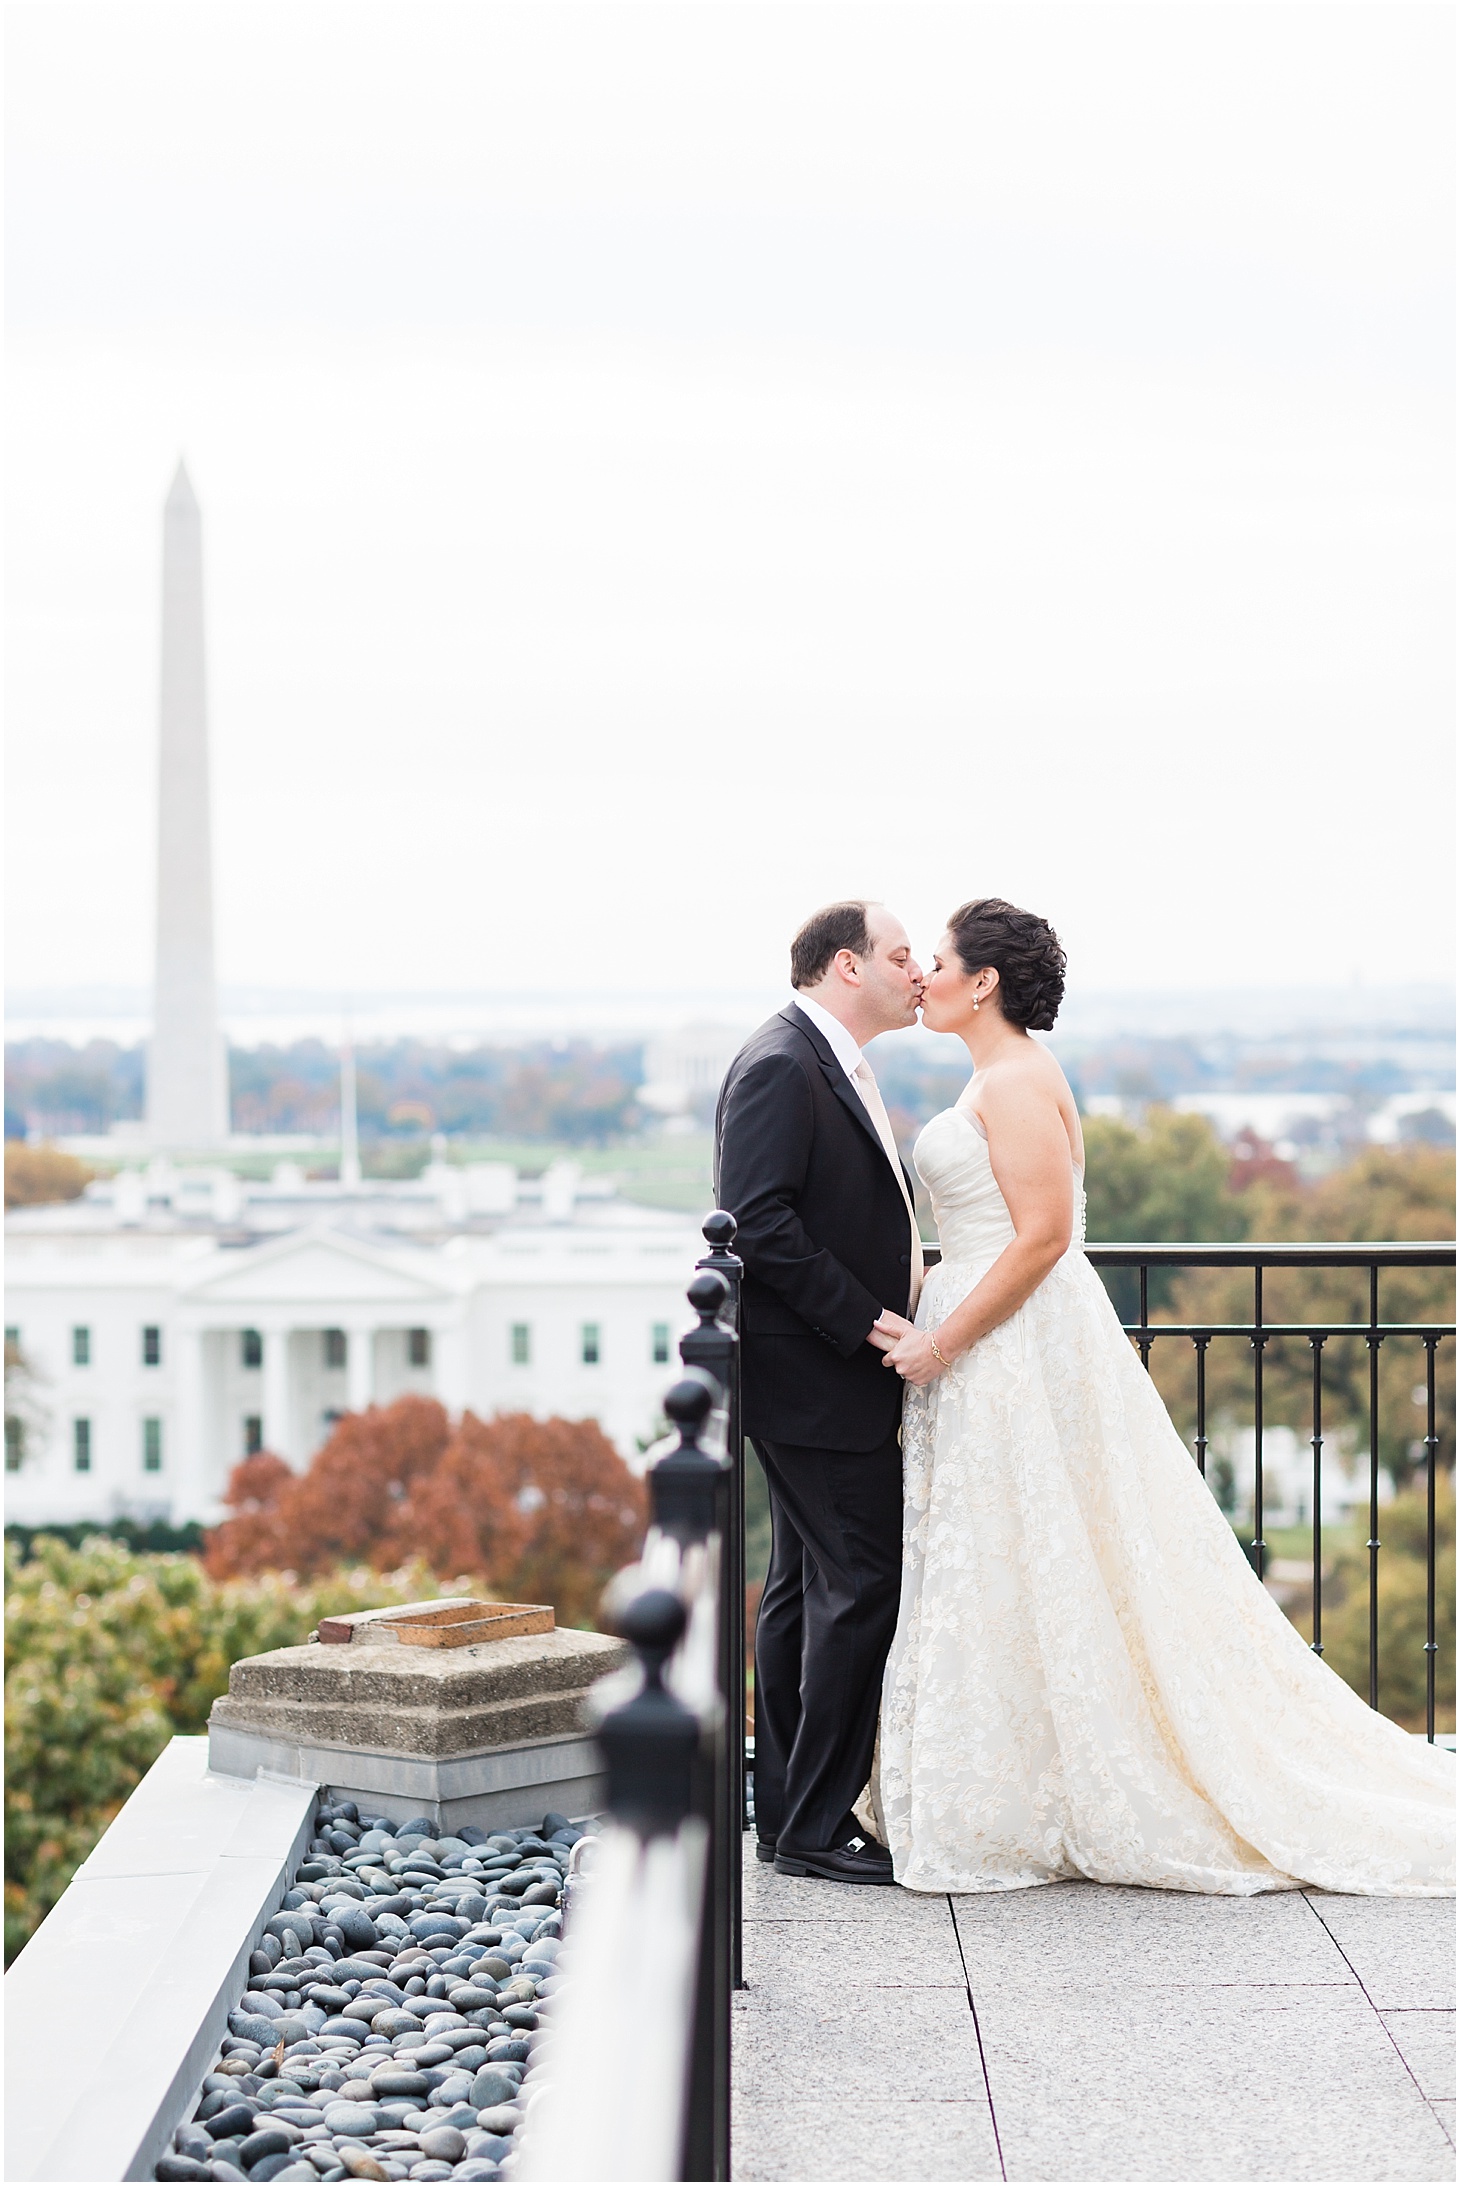 First Look on the rooftop of the Hay-Adams Hotel | Winter Brunch Wedding at Hay-Adams Hotel in DC | Sarah Bradshaw Photography